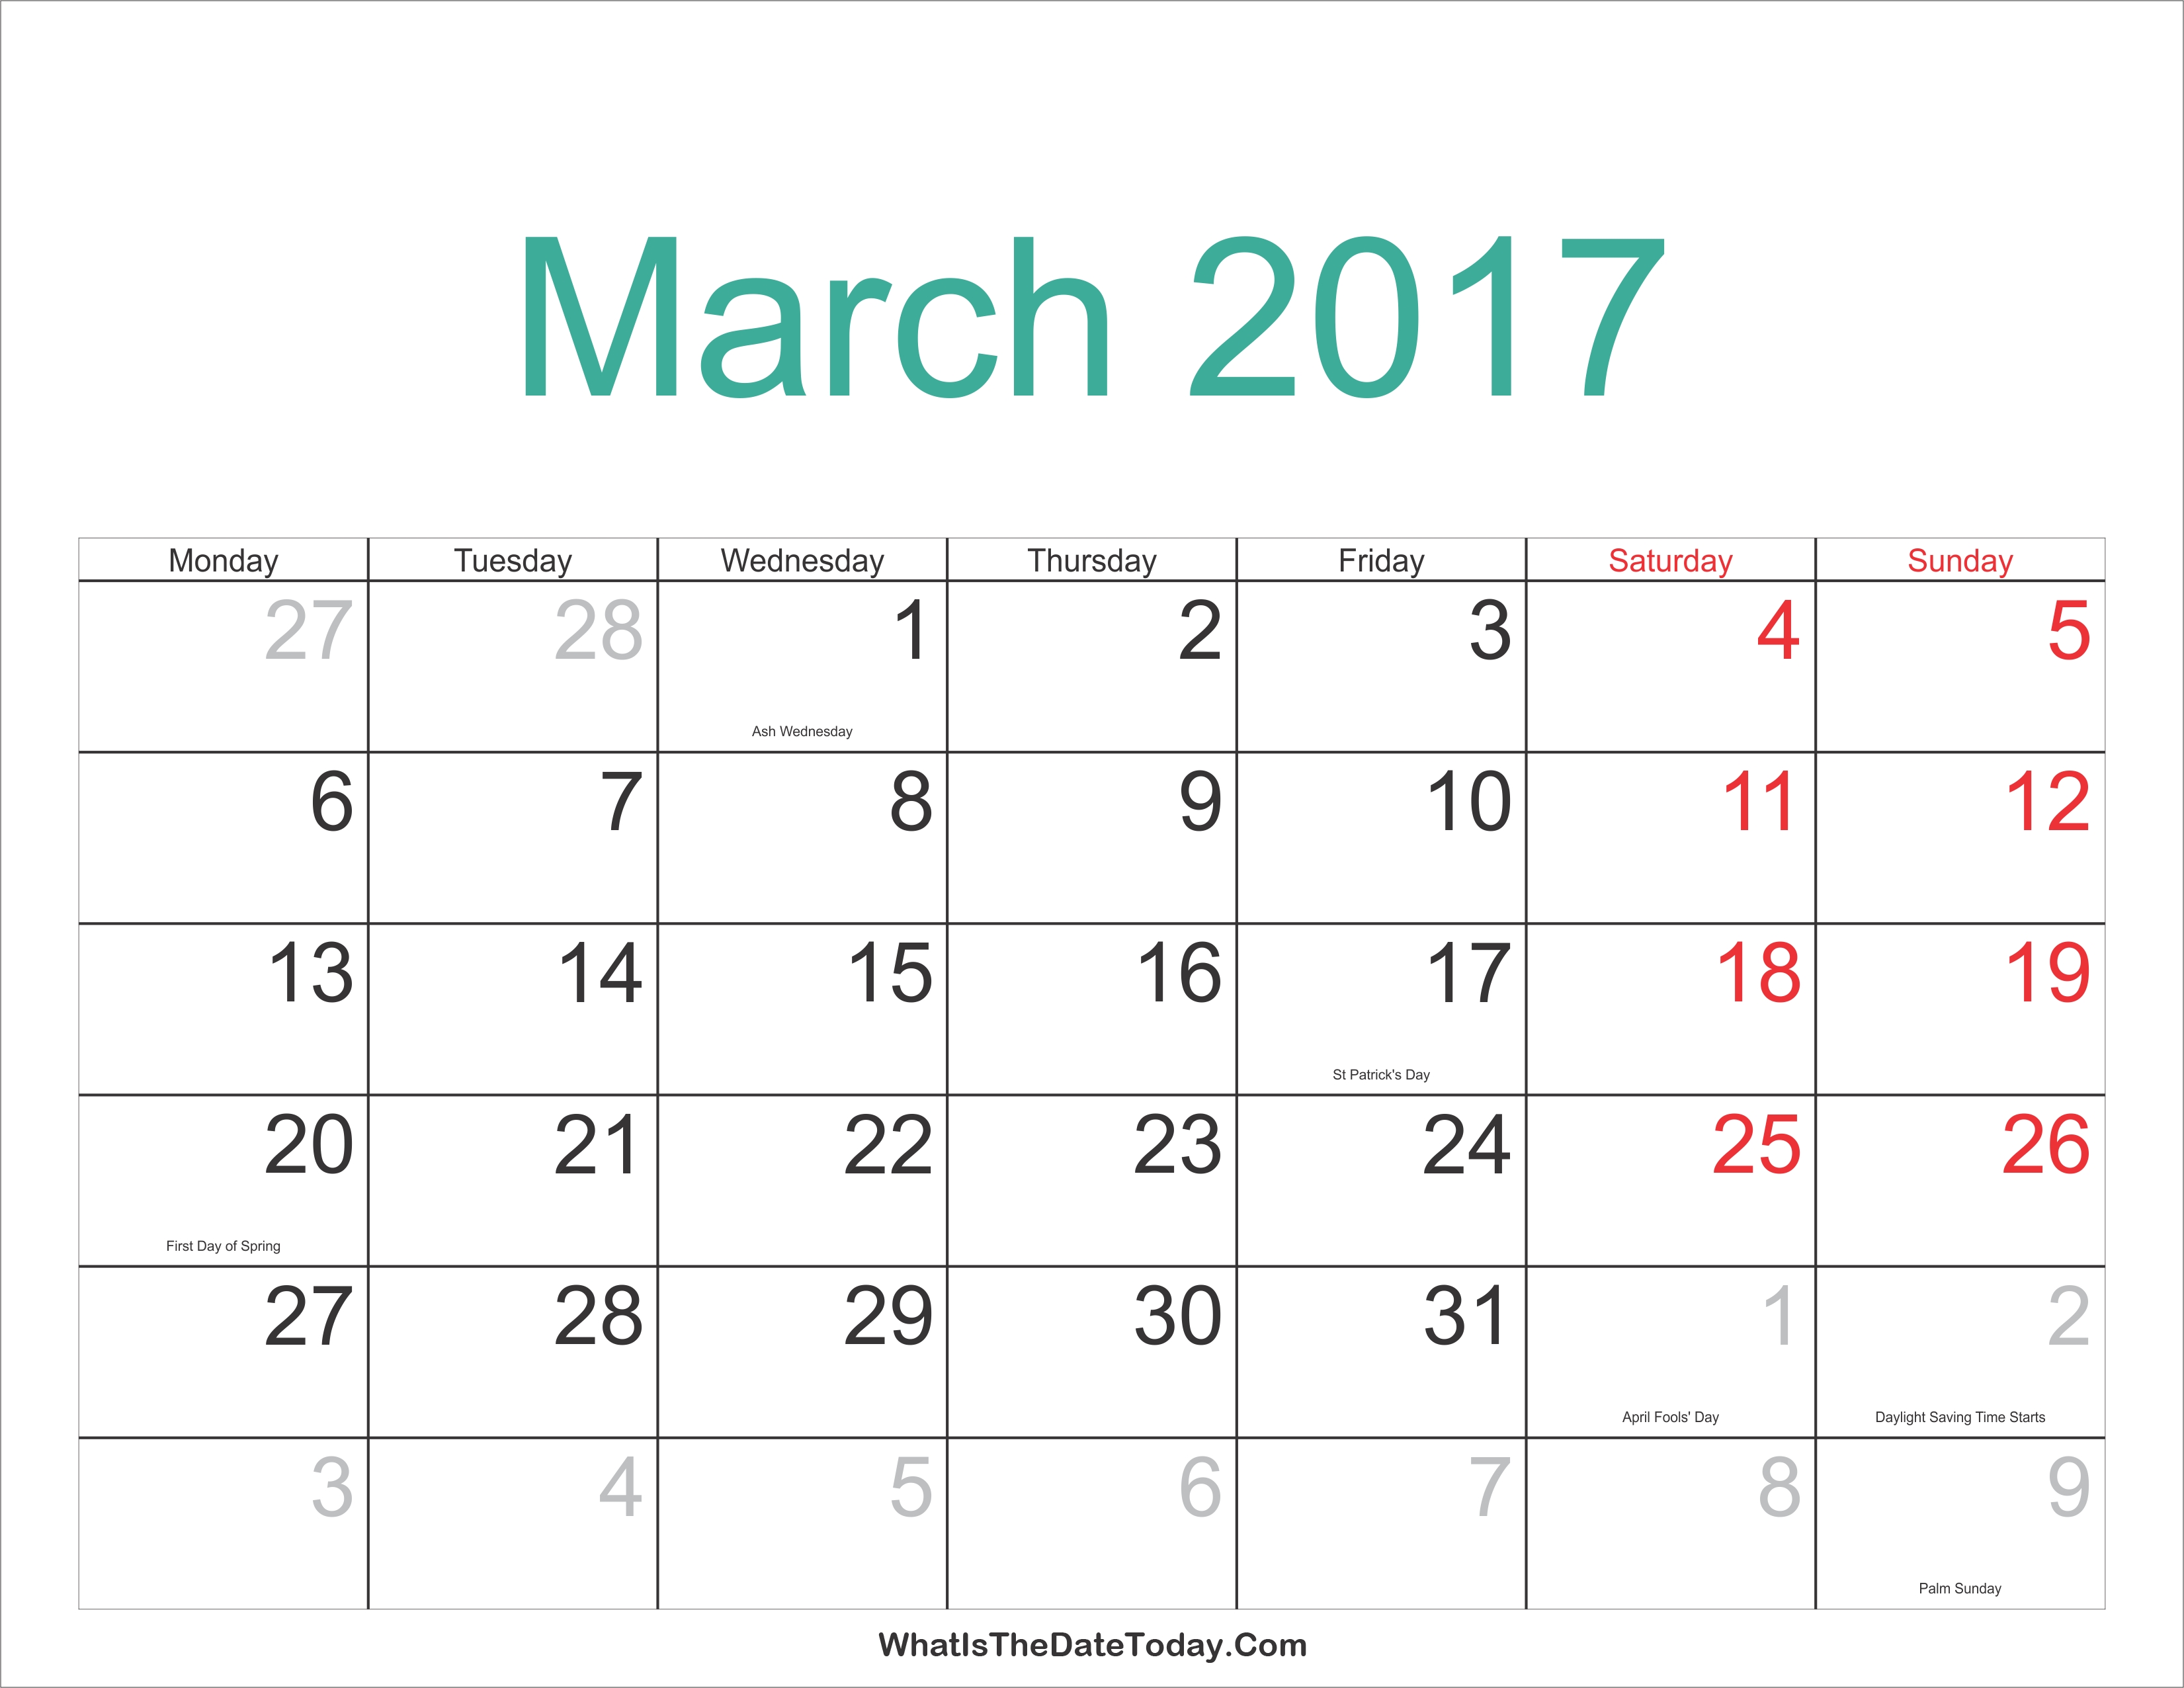 march-2017-calendar-printable-with-holidays-whatisthedatetoday-com